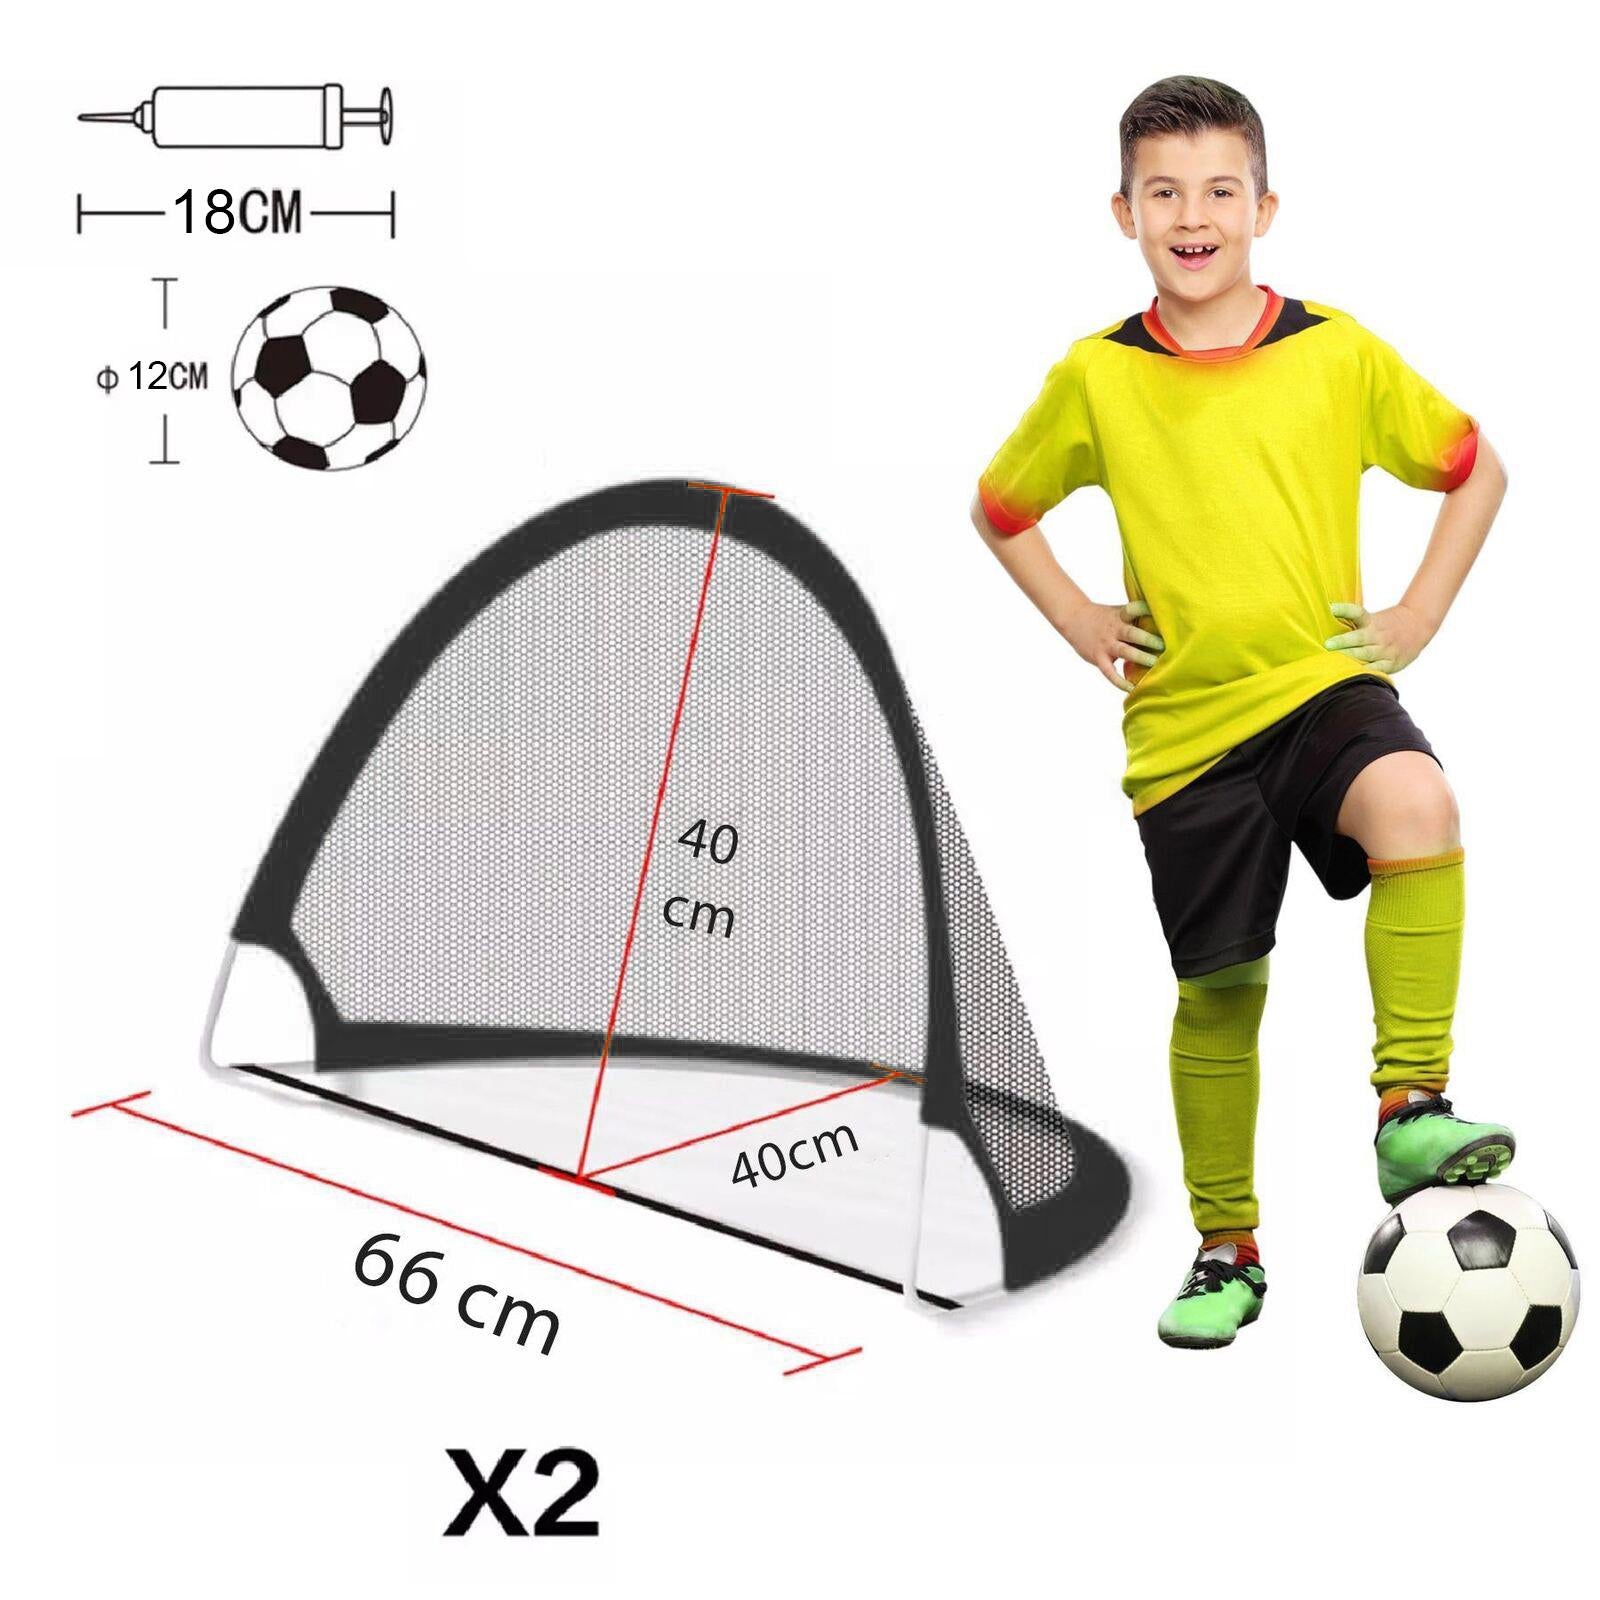 Pop-Up Goal Set of 2 with Ball and Pump by The Magic Toy Shop - The Magic Toy Shop